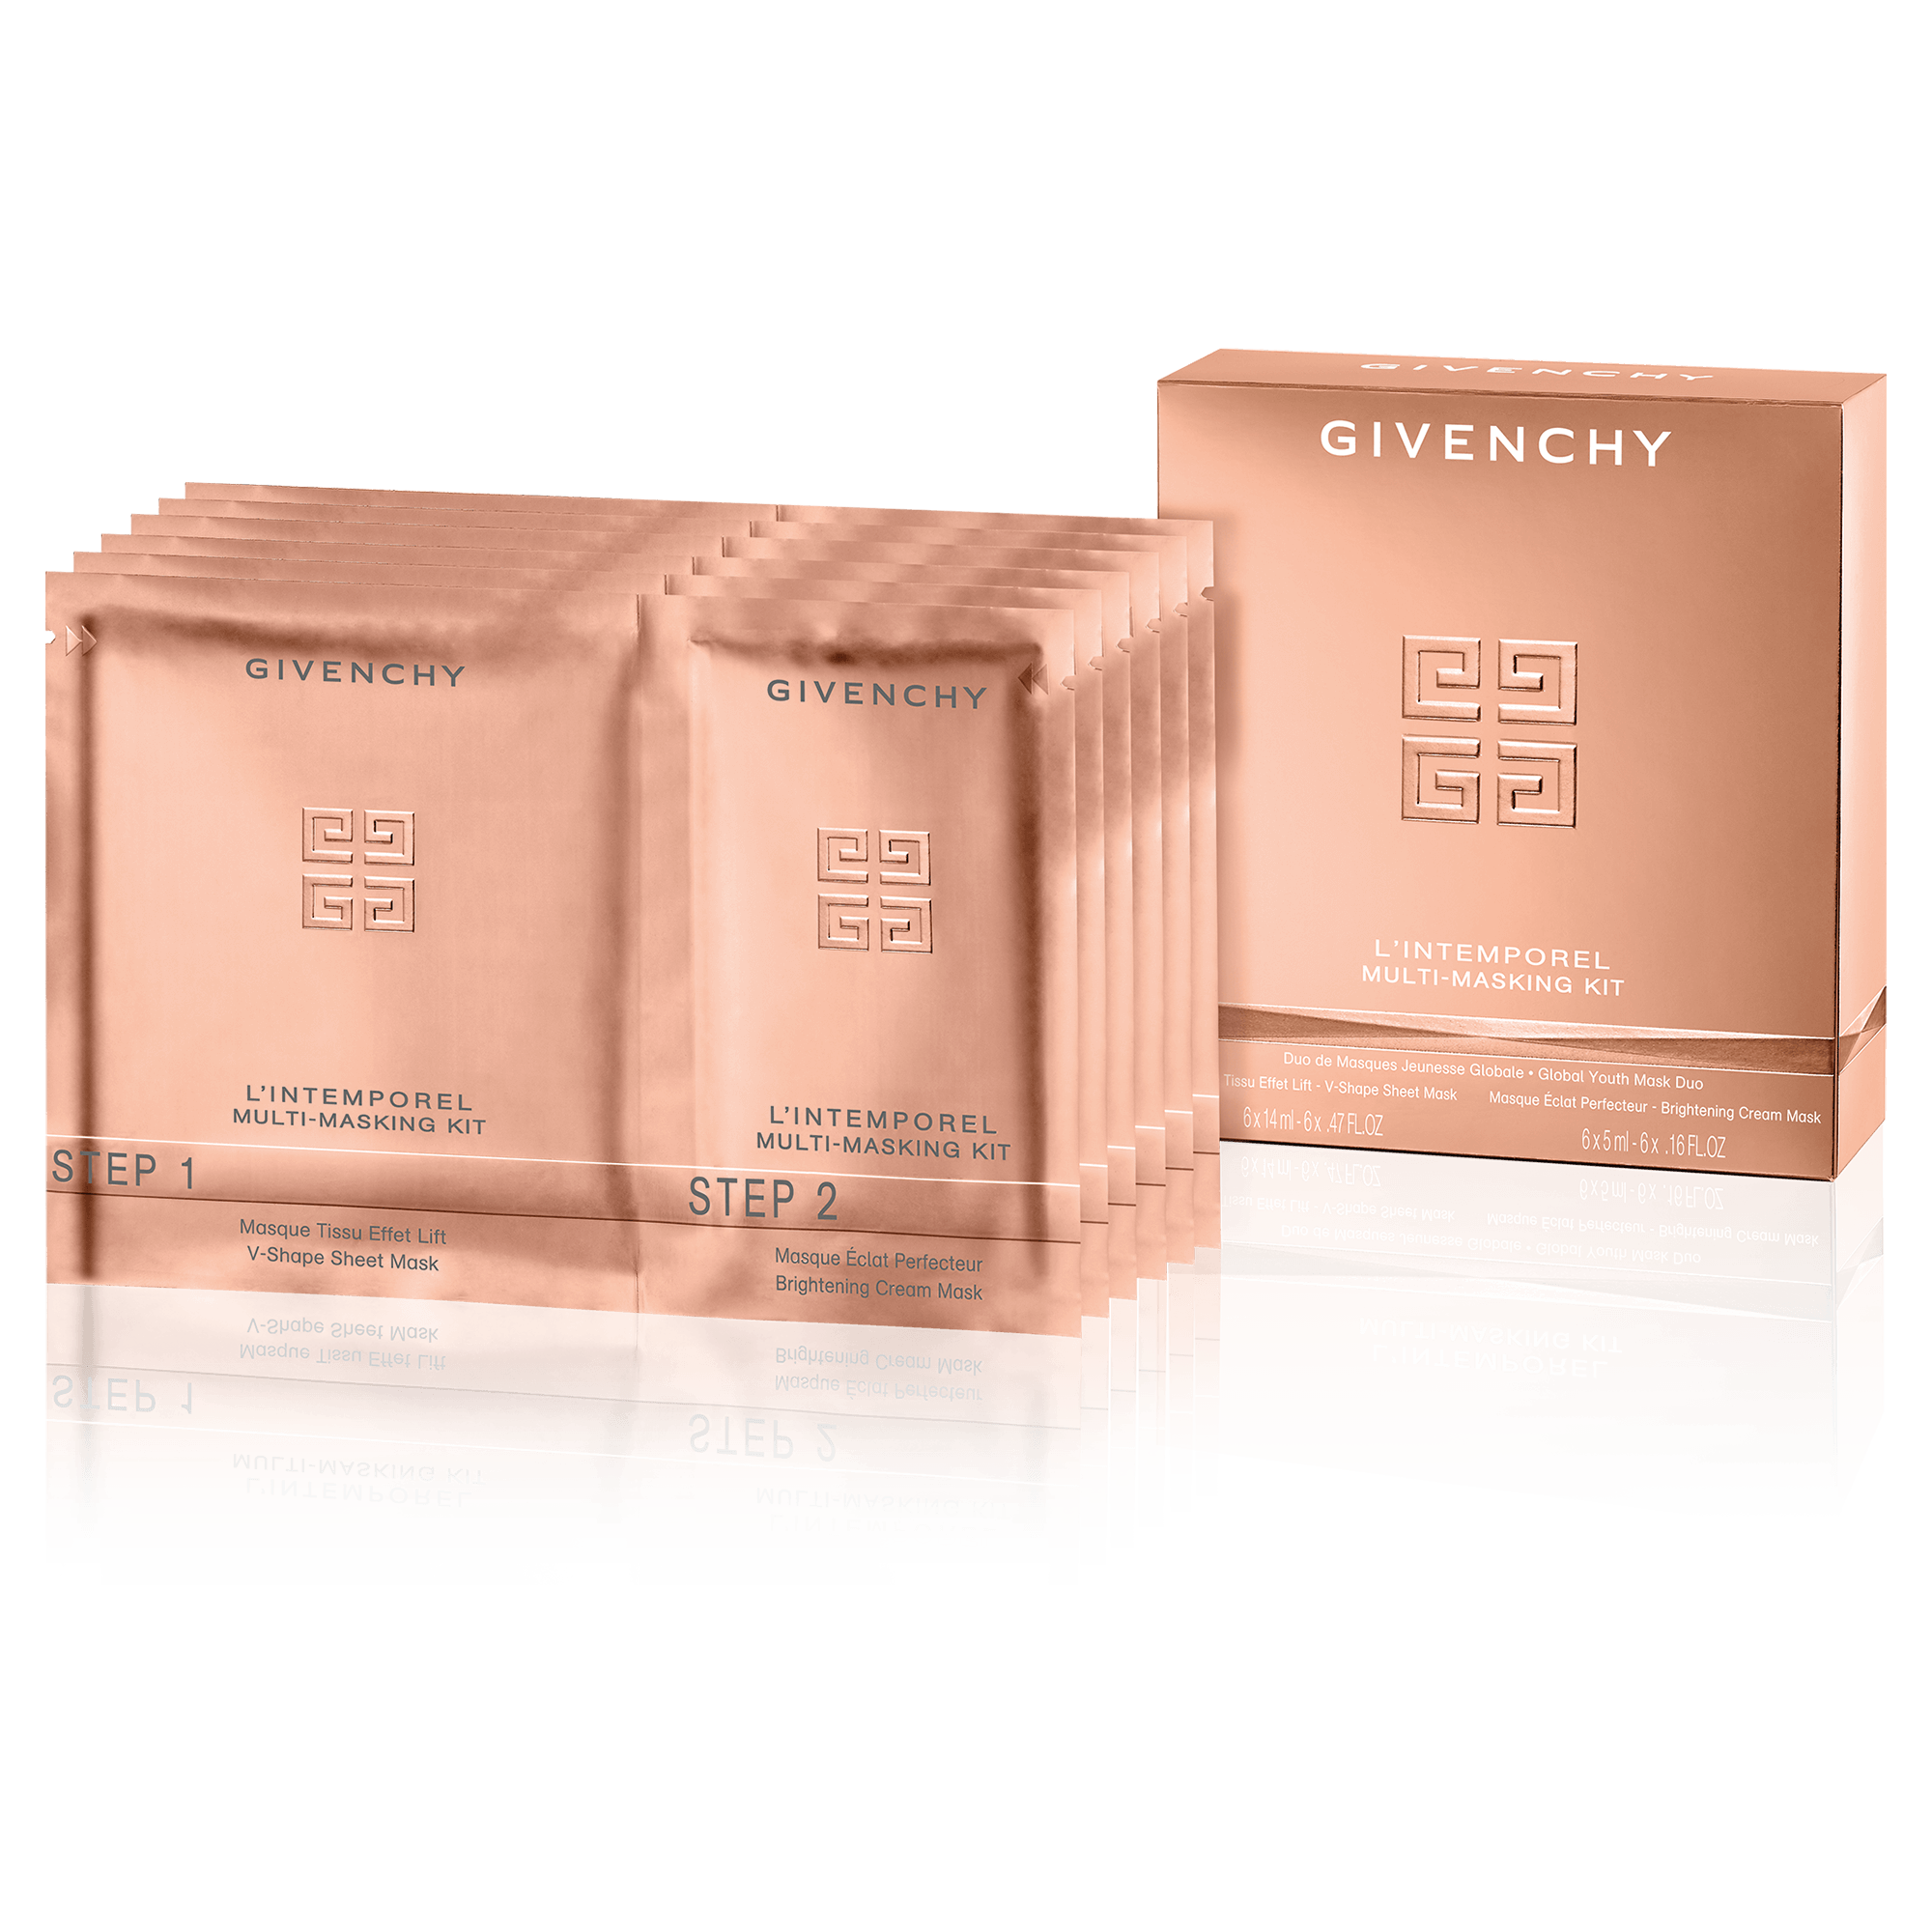 givenchy skin care products